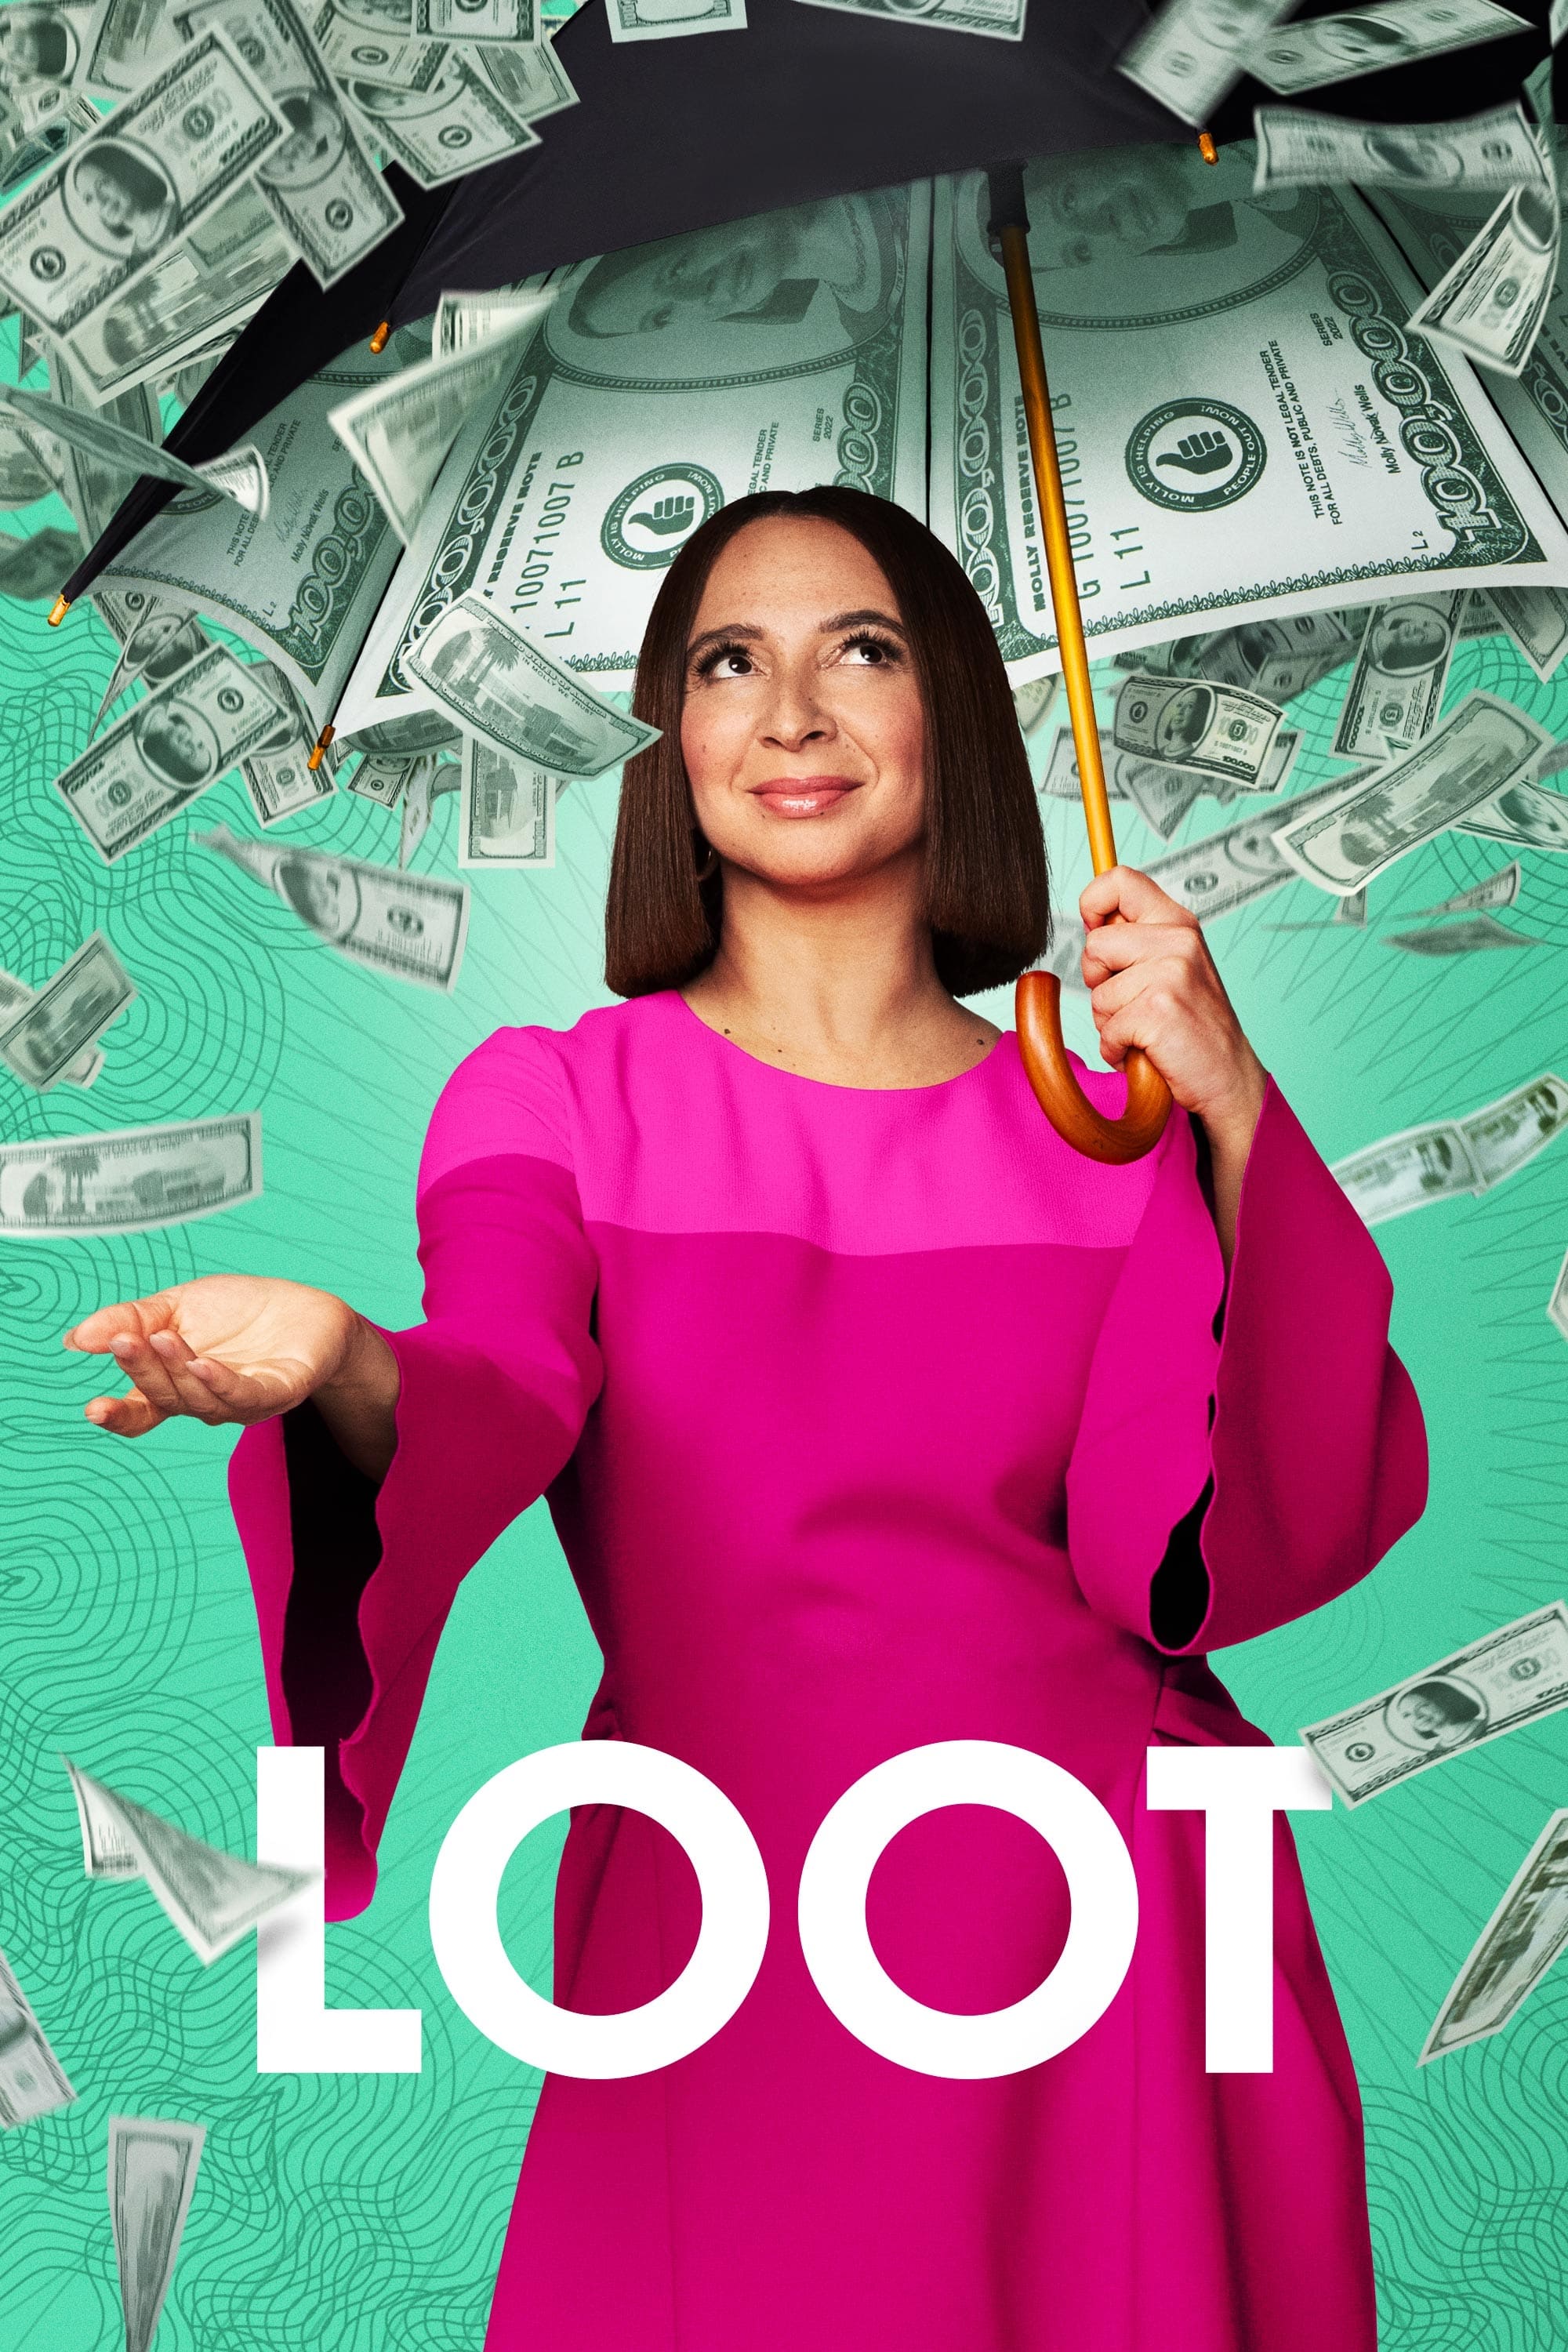 Loot TV Shows About Workplace